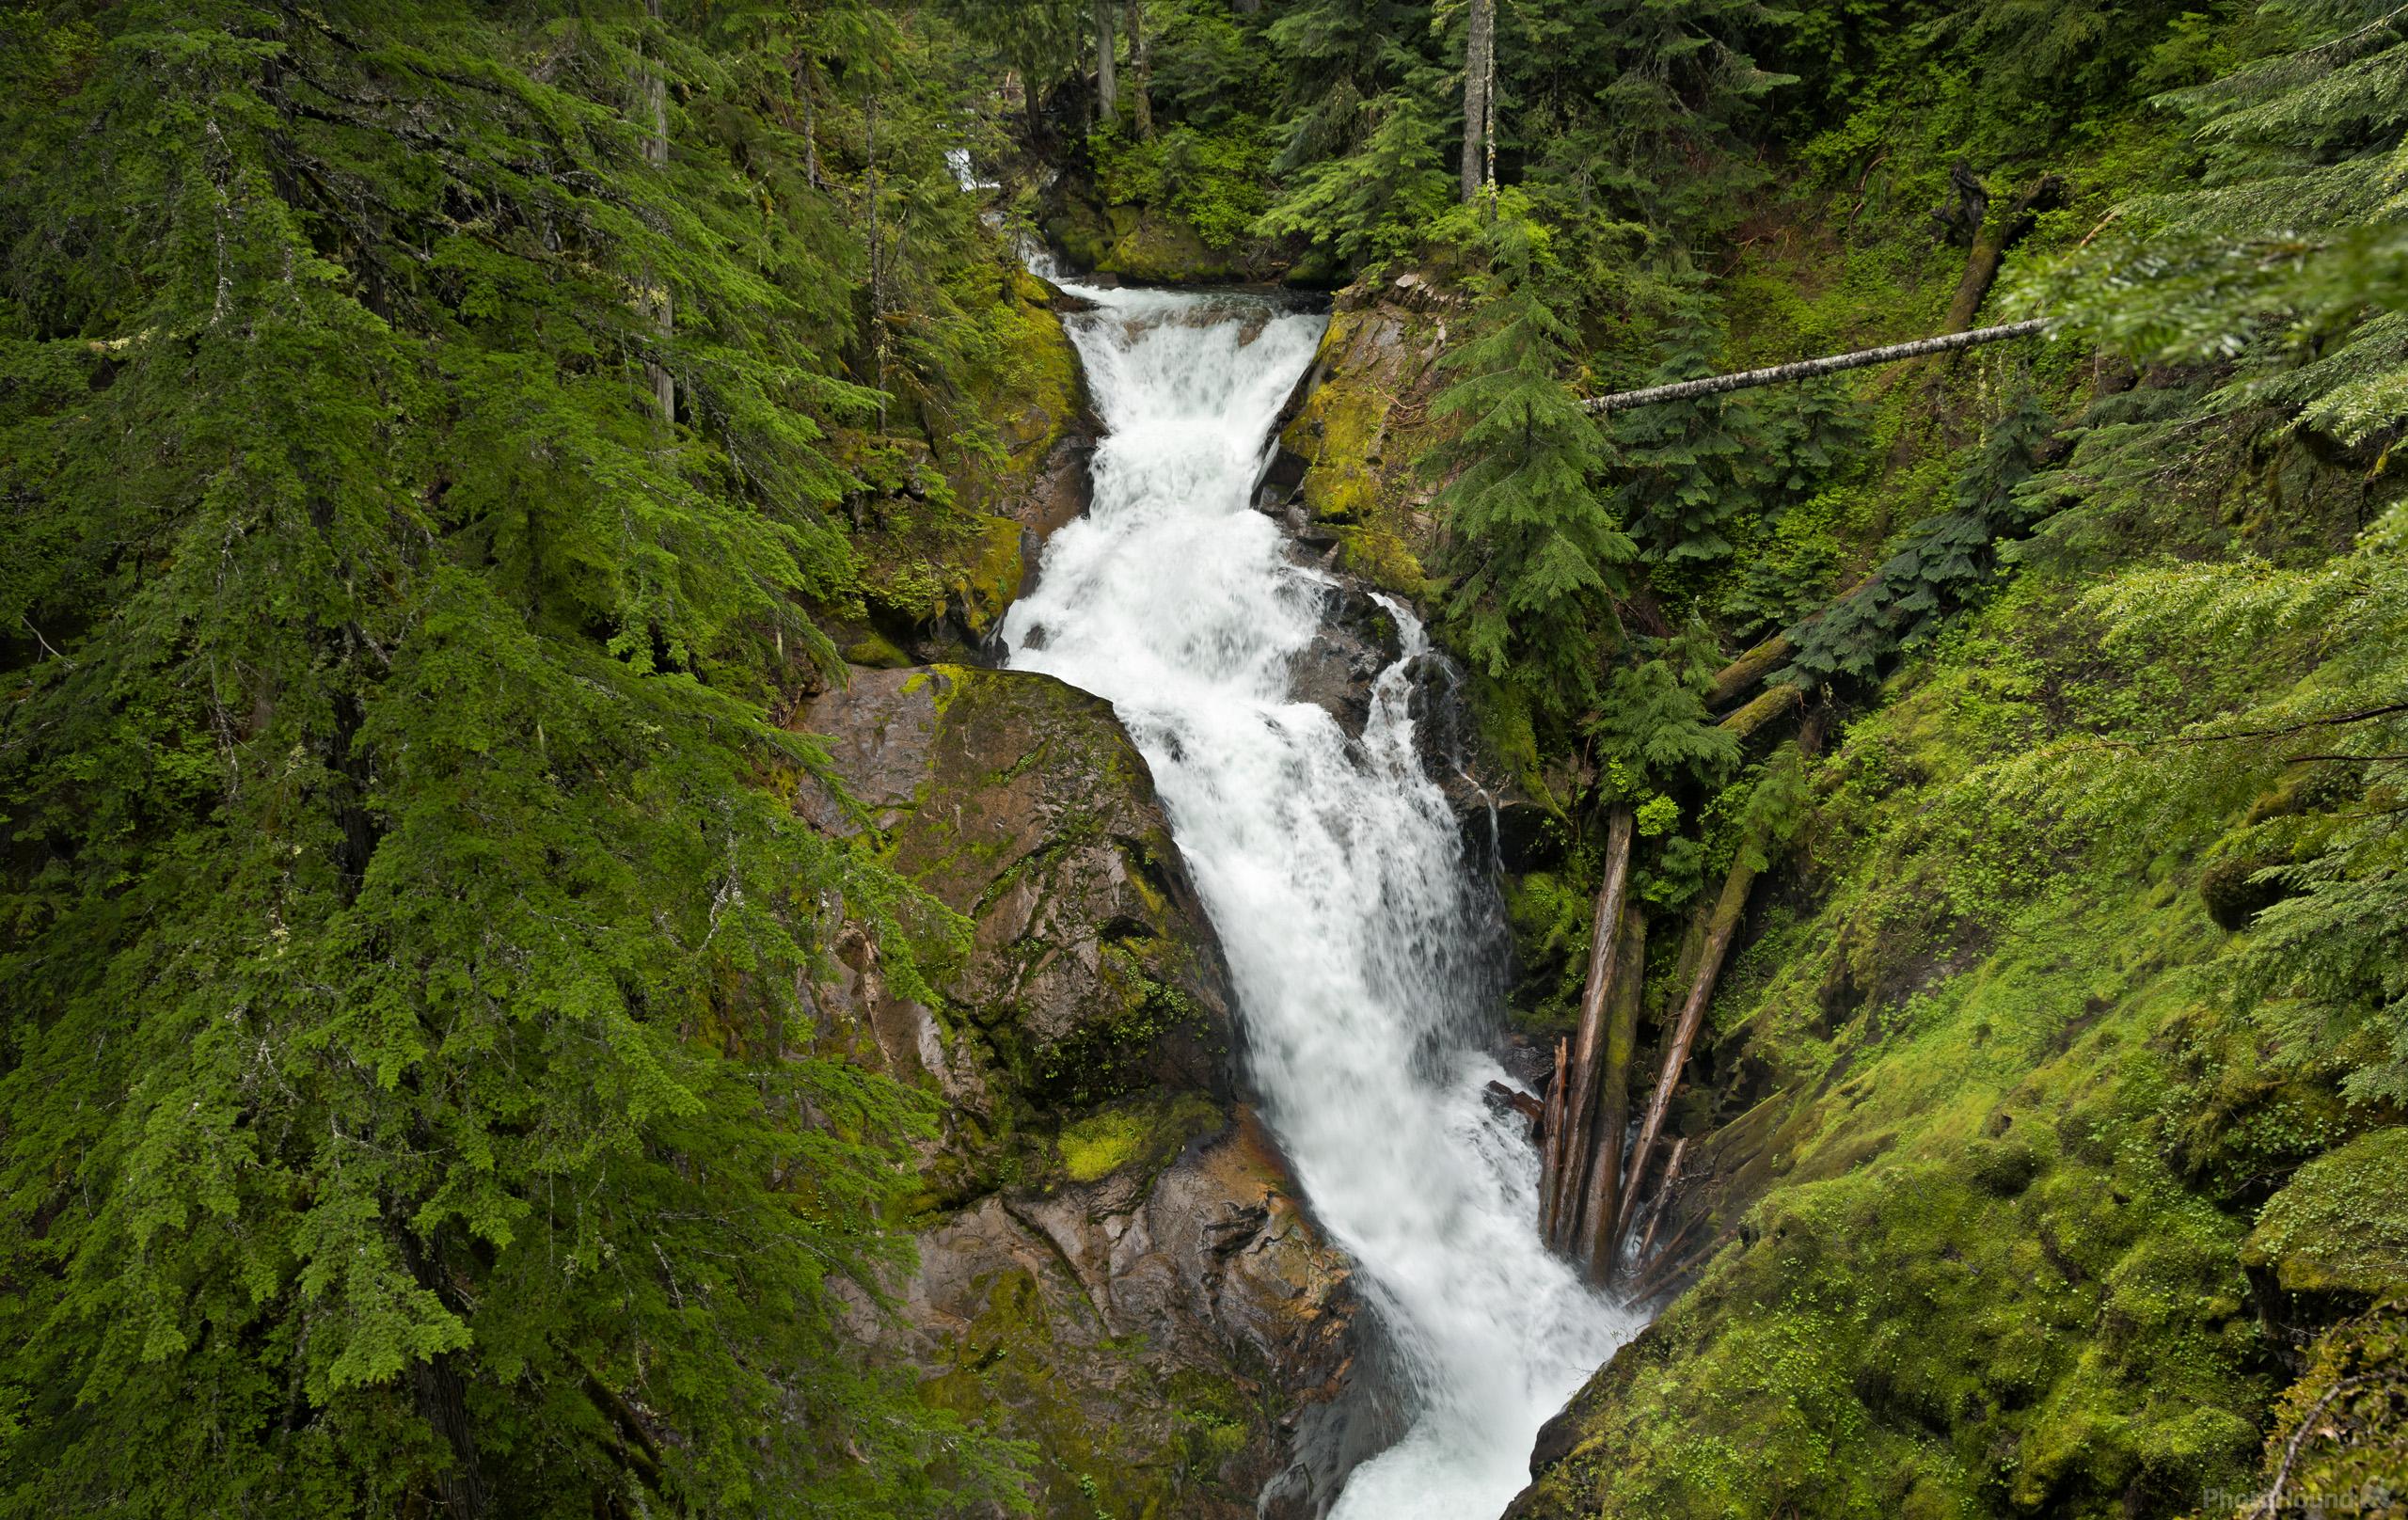 Image of Stafford Falls, Mount Rainier National Park by T. Kirkendall and V. Spring